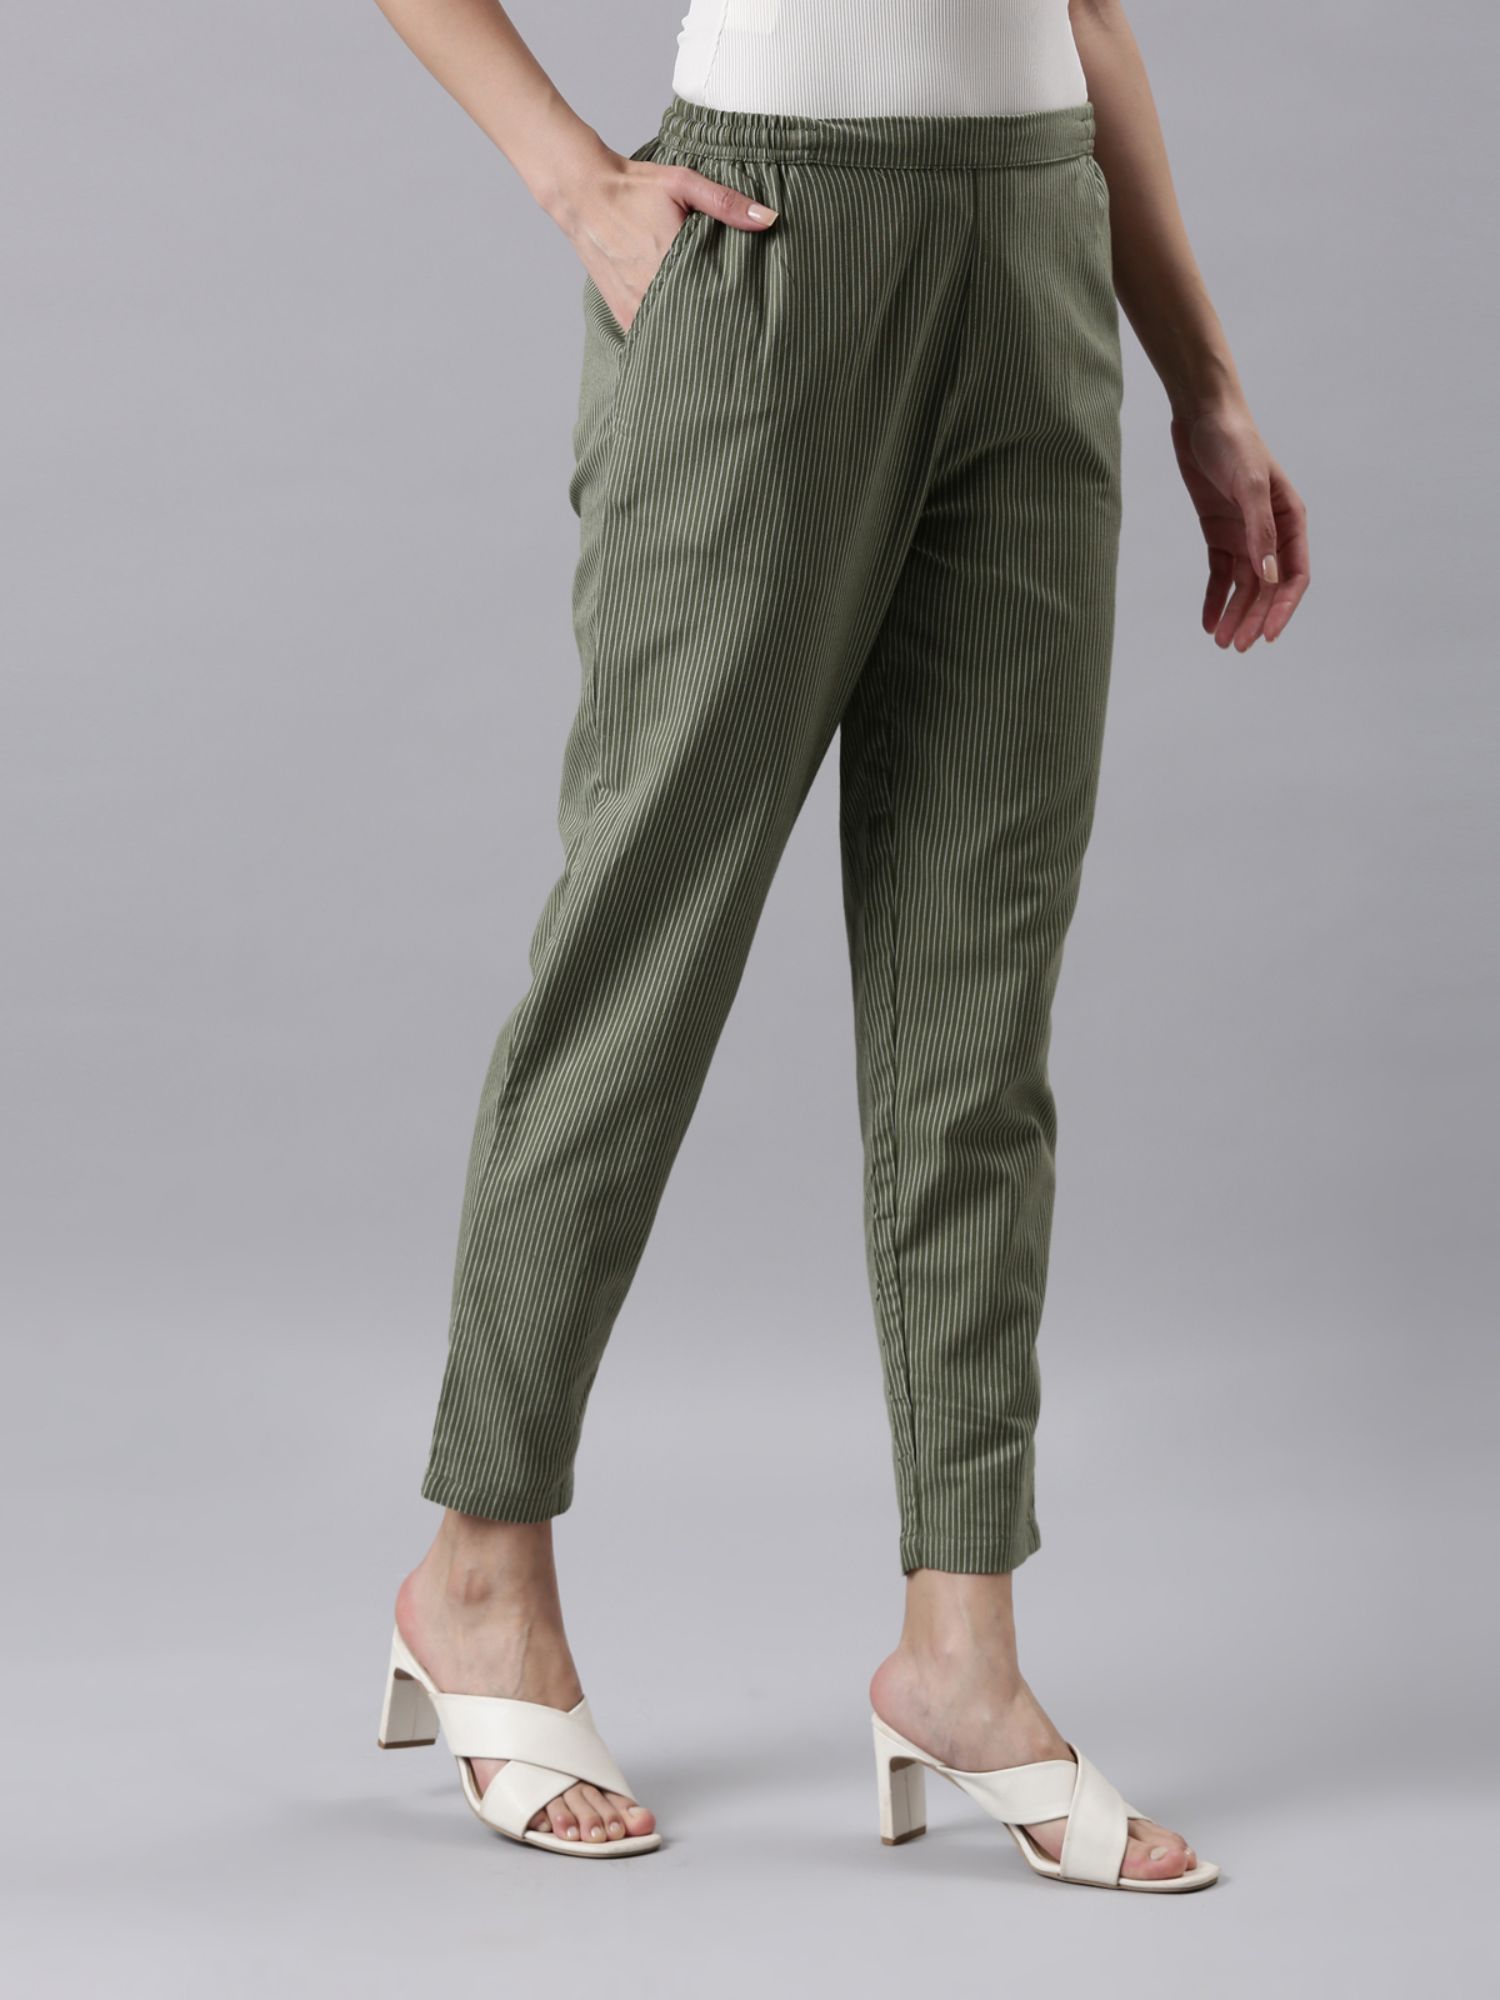 Women Casual Pencil Pants Elastic High Waisted Straight Leg Cotton Lounge Pants  Trousers with Pockets Cargo Trousers for Women Purple L - Walmart.com